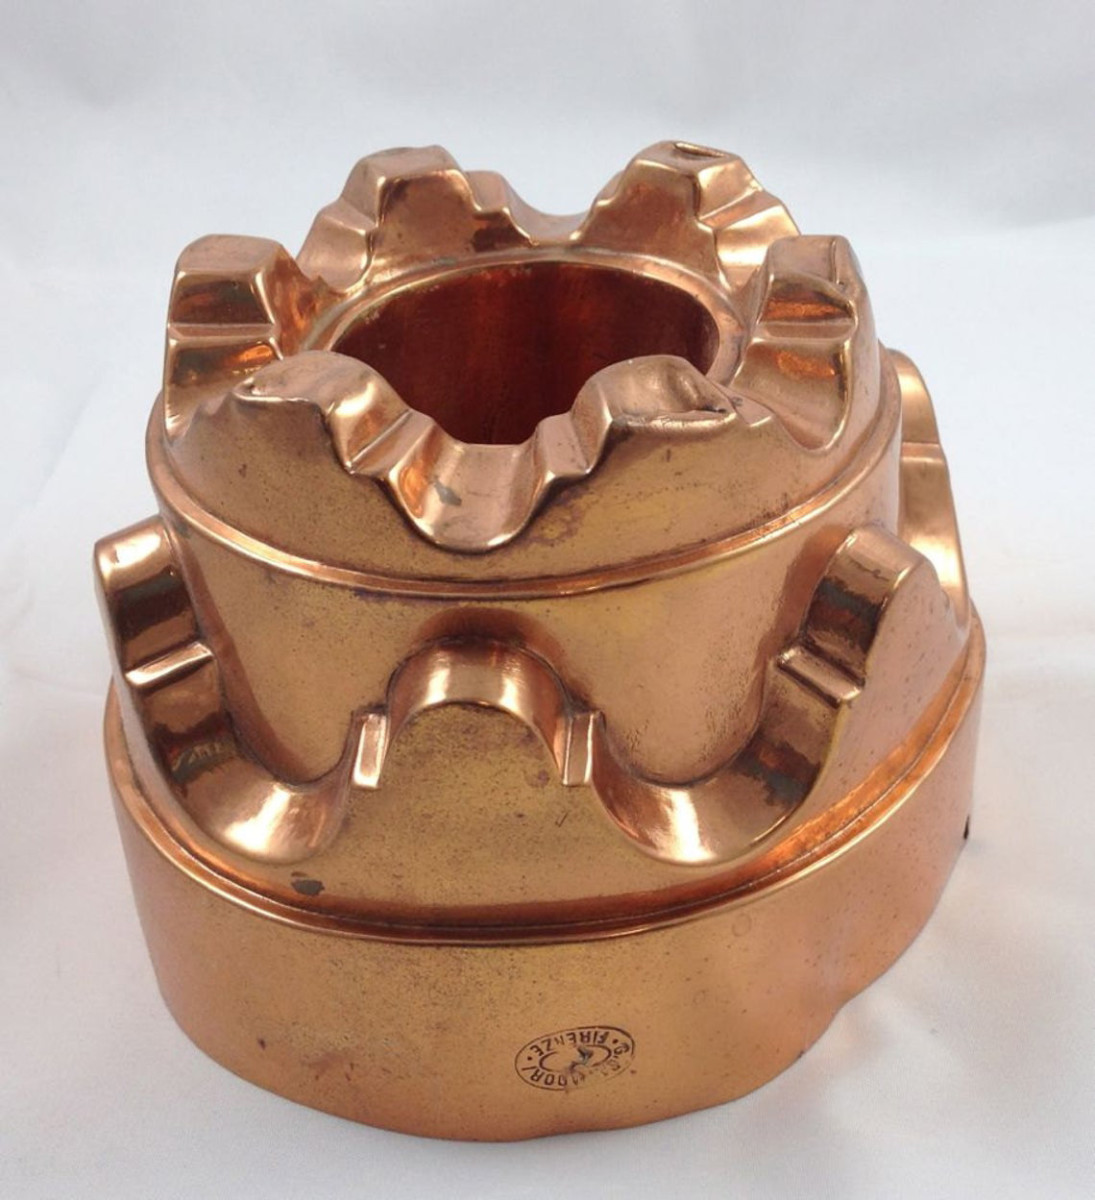 Copper mold by Salvatore Firenze, Italy, circa 1900, has three tiers that give it the appearance of height, 5" dia, 4" h; $234.95.